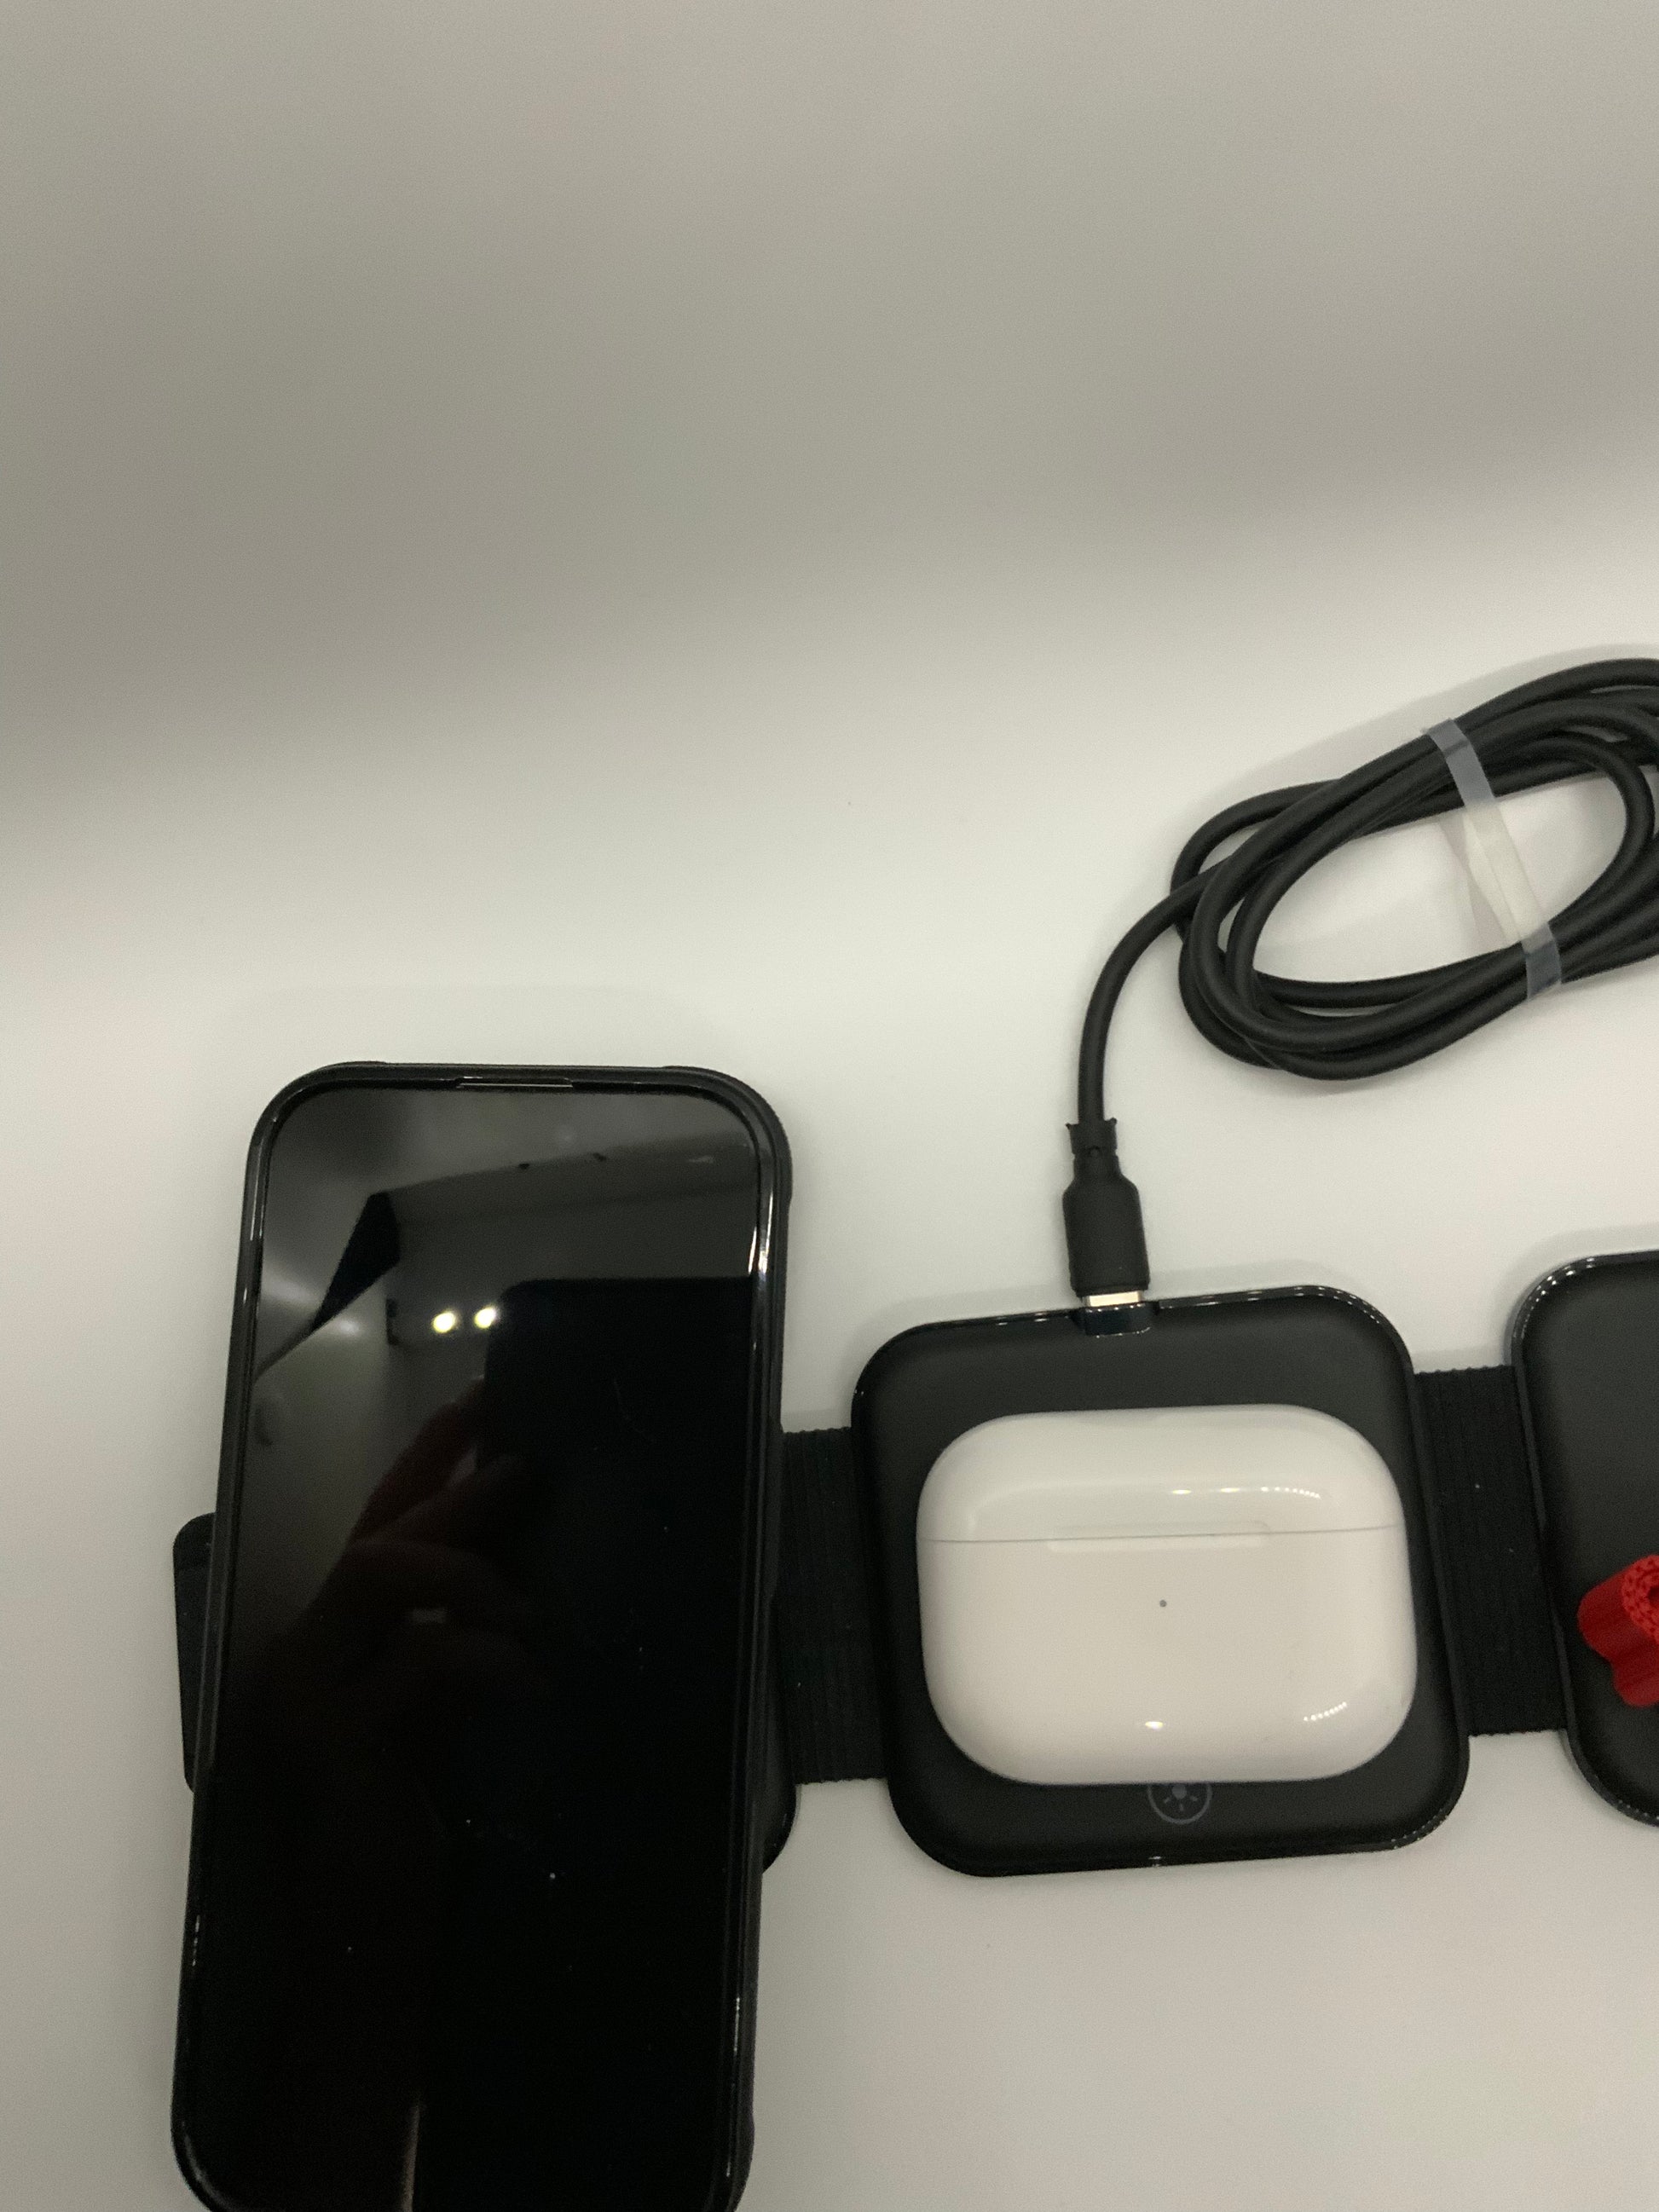 Be My AI: The picture shows a few items placed on a white surface. On the left side, there is a smartphone with a black screen, which seems to be turned off. The phone is in a black case with a strap attached to it. 

On the right side, there is a white case of wireless earbuds placed on a black square pad with a strap. Above the earbuds case, there is a black cable coiled up. The cable has a USB connector on one end.